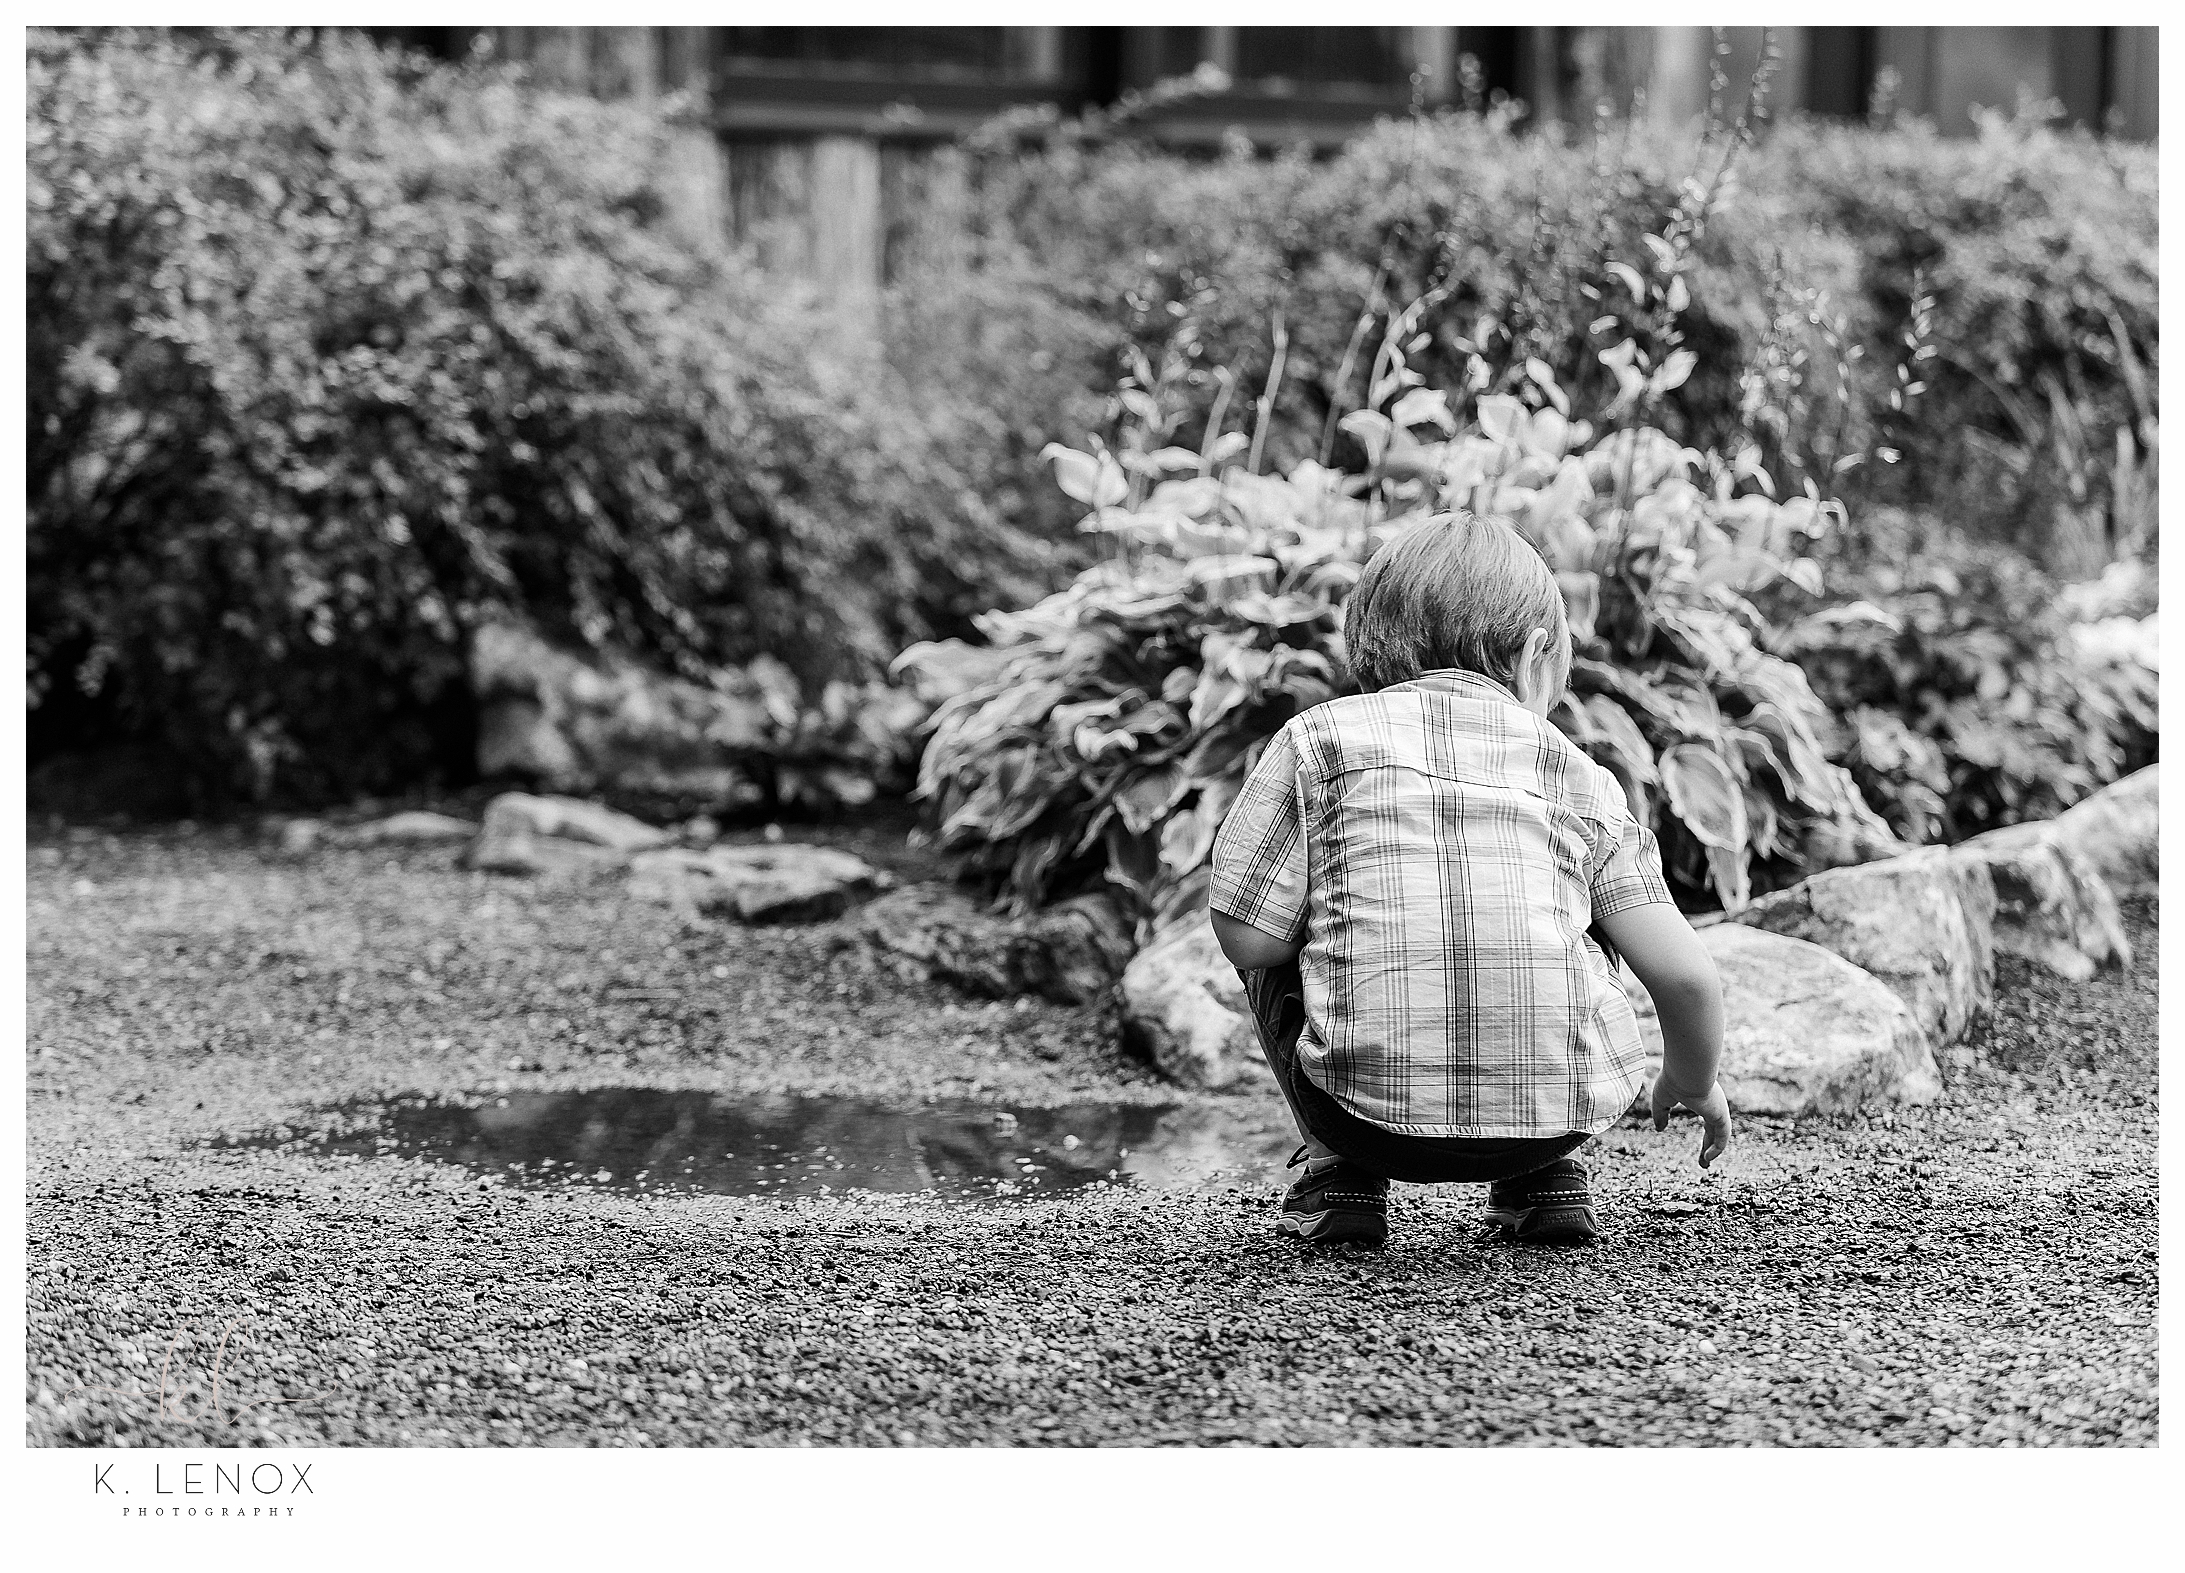 Black and White candid photo of a young boy playing in a mud puddle. 